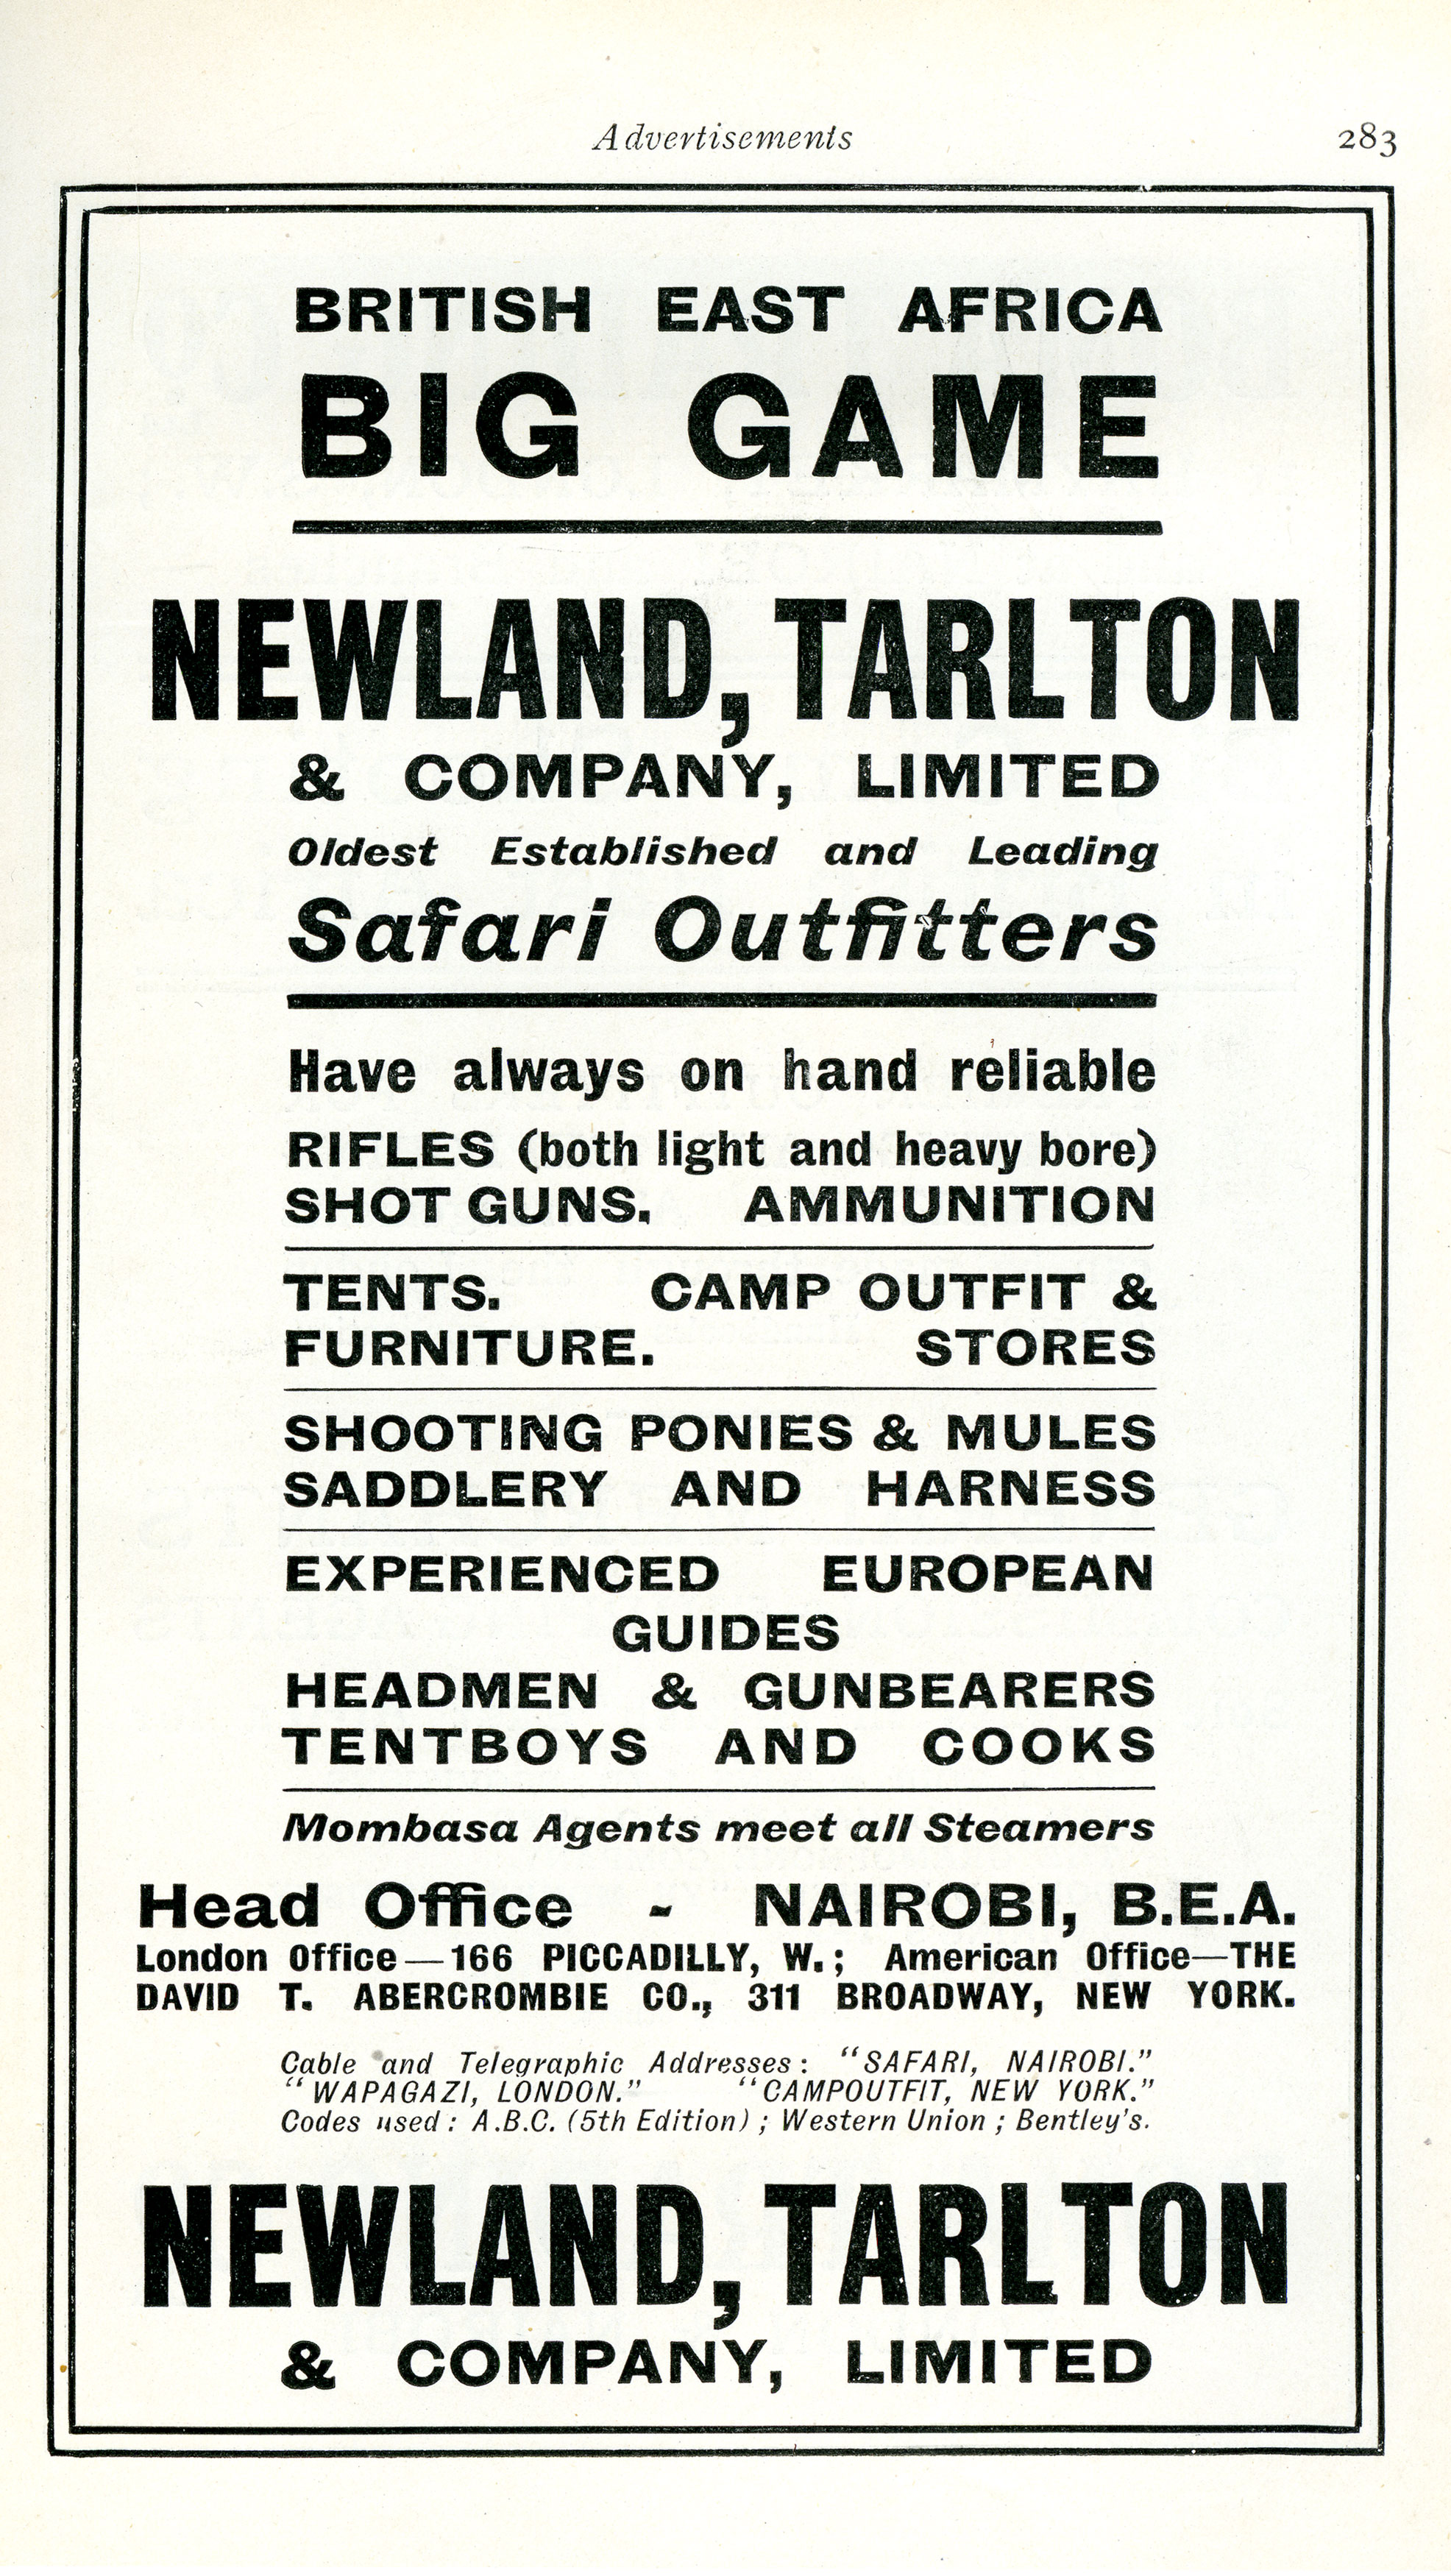 old advertisement for a safari outfitters